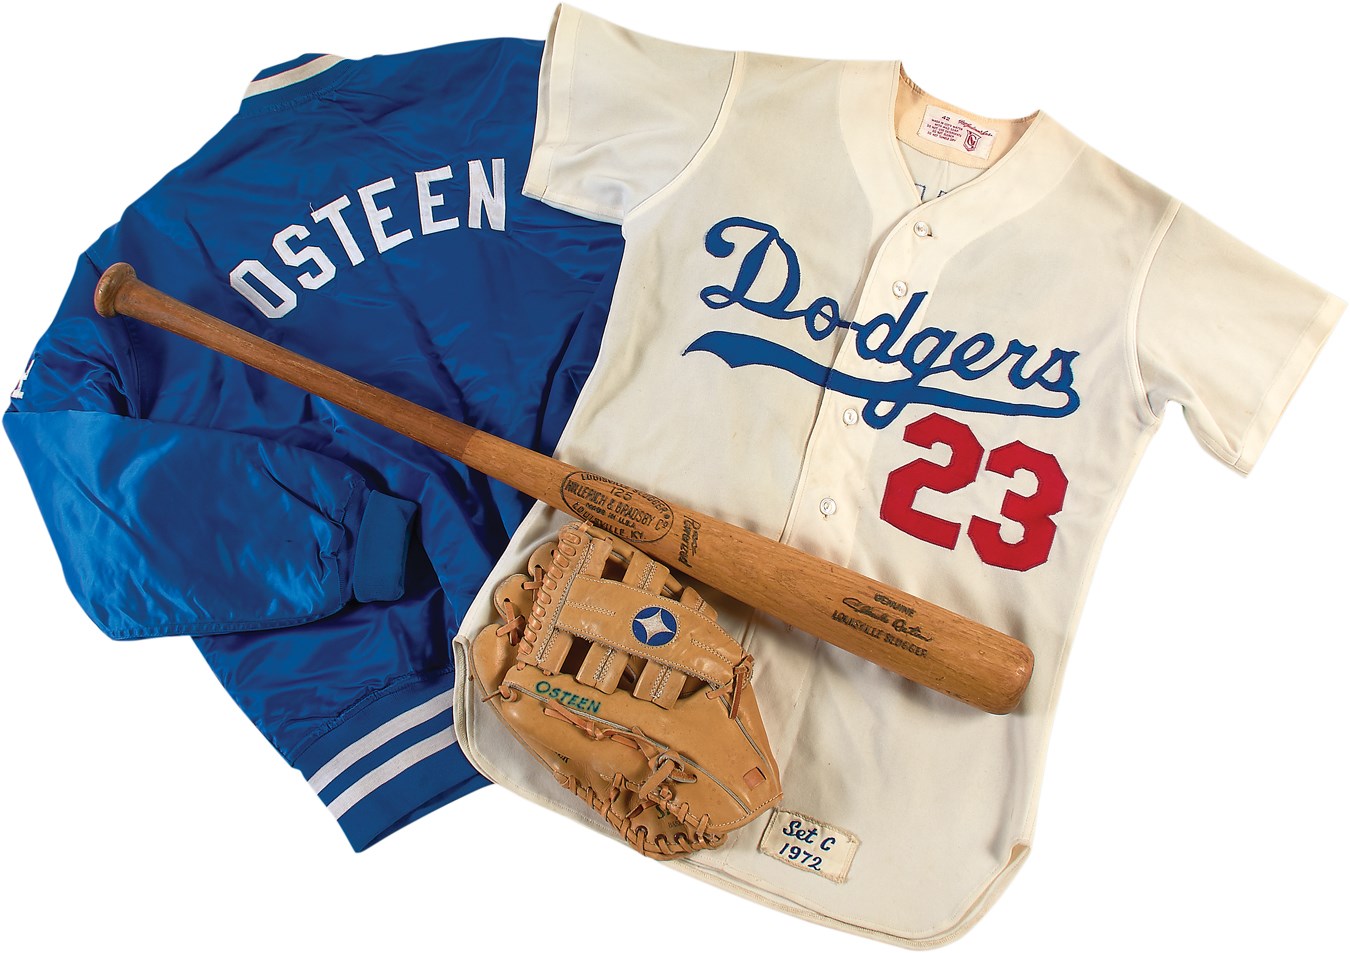 Jackie Robinson & Brooklyn Dodgers - Claude Osteen Los Angeles Dodgers Game Used Jersey, Bat, Glove & Jacket